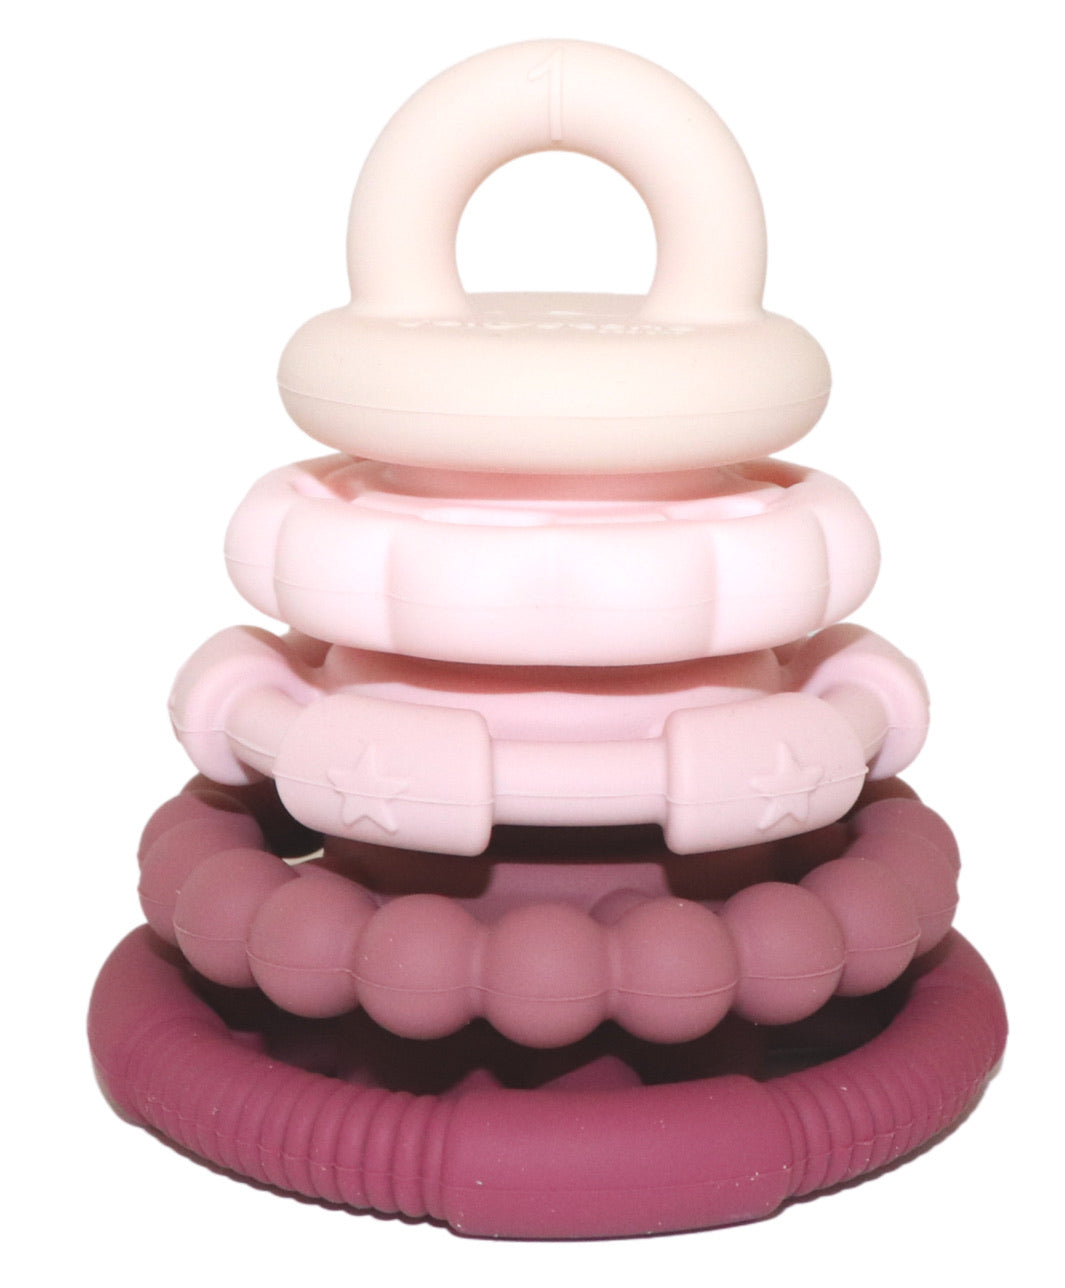 Jellystone Designs Rainbow Stacker and Teething Toy Dusty